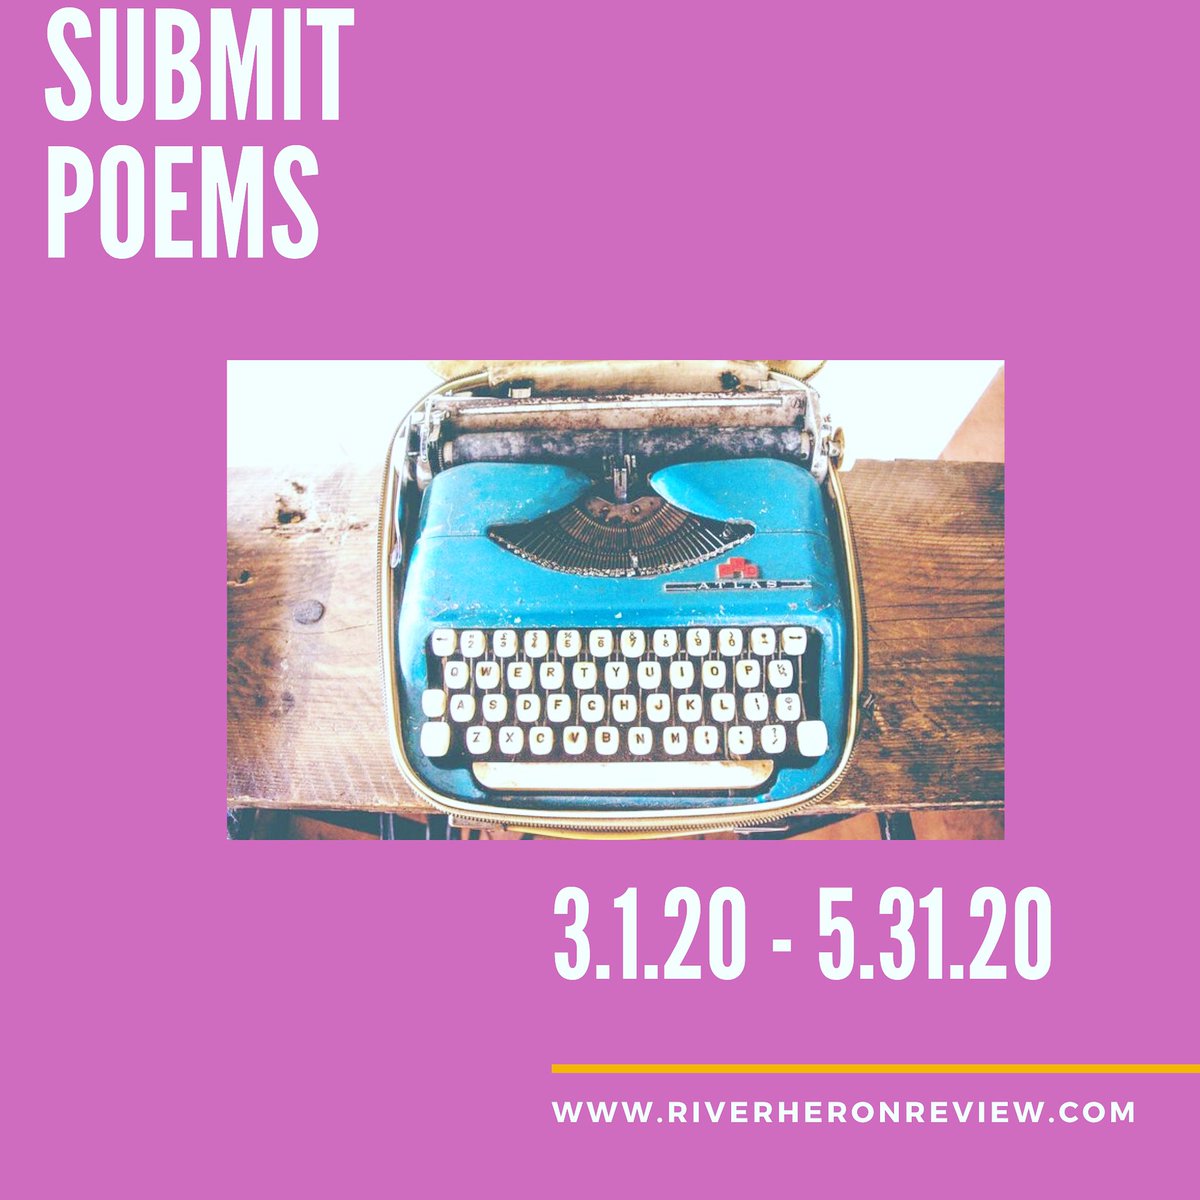 The new submission periods for RHR and for the River Heron Poetry Prize run through 5.31.20. Check out the details: riverheronreview.com We look forward to reading your poetry! #callforsubmissions #callforentries #stayhome #write #submitpoems